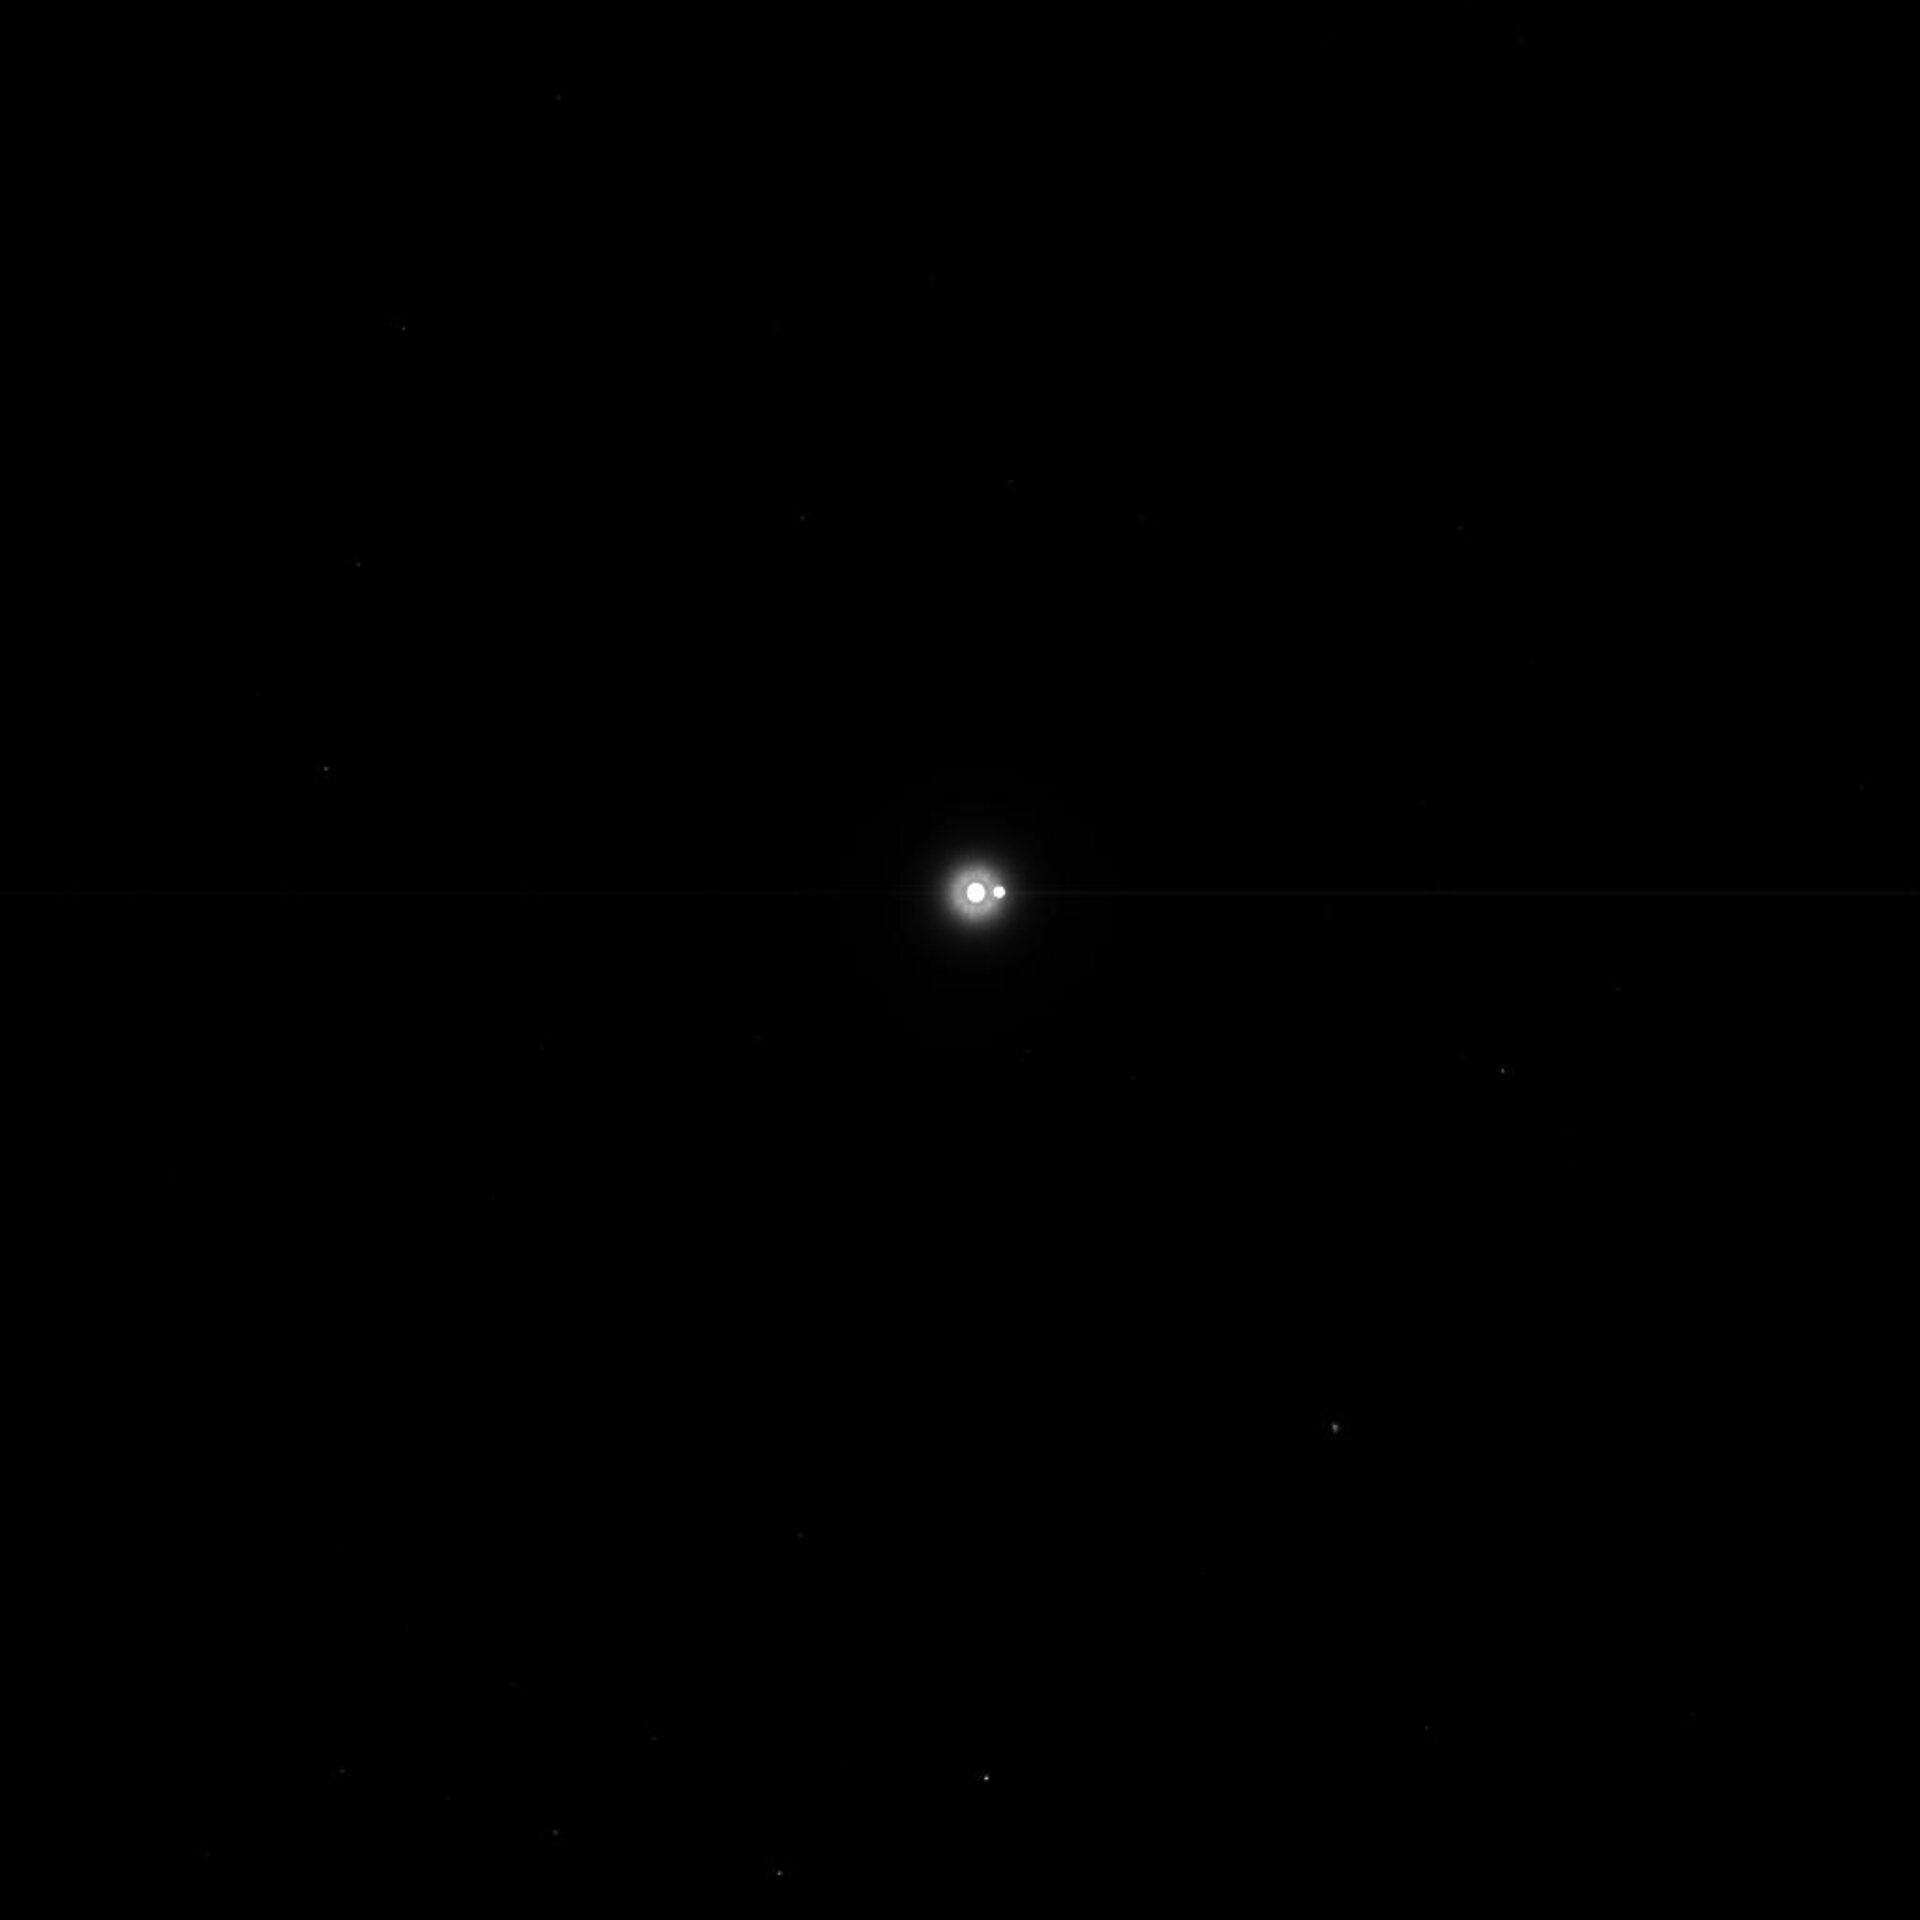 The Earth-Moon system taken from Rosetta